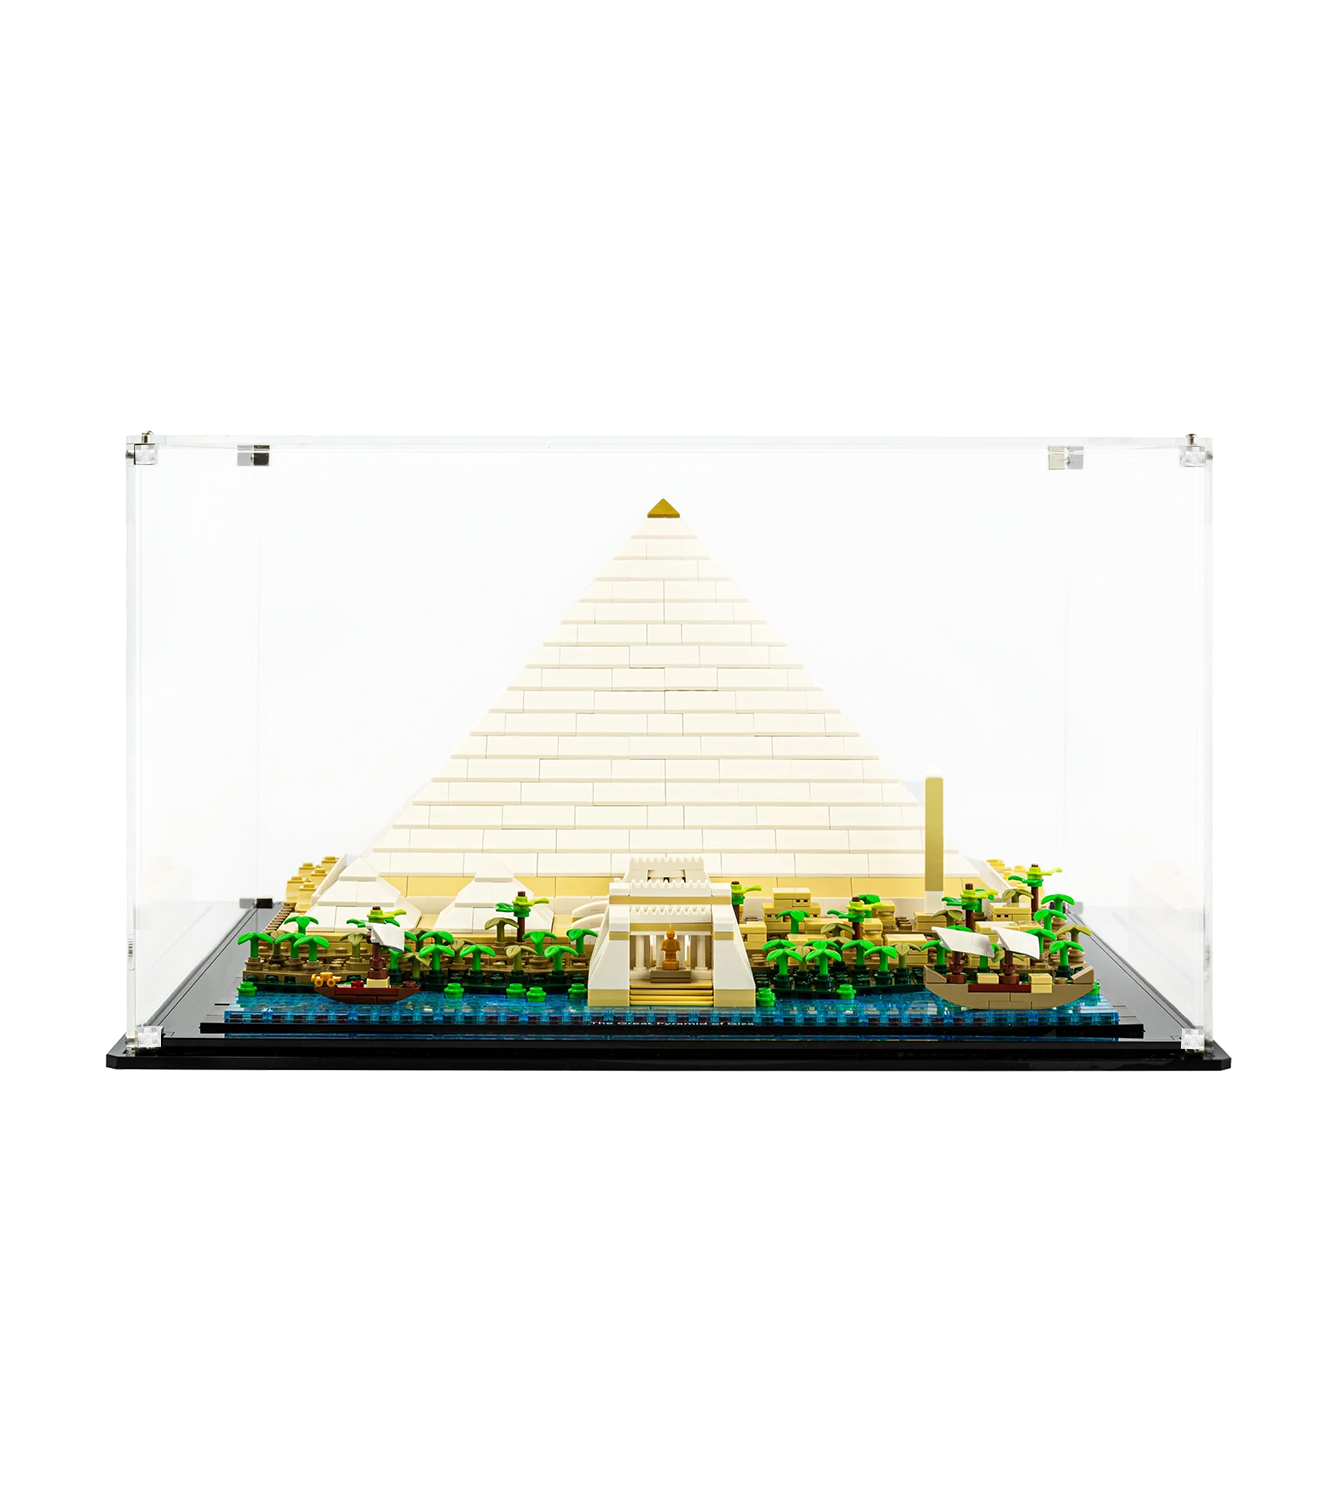 ICUANUTY-Display Case for Lego The Great Pyramid of Giza 21058